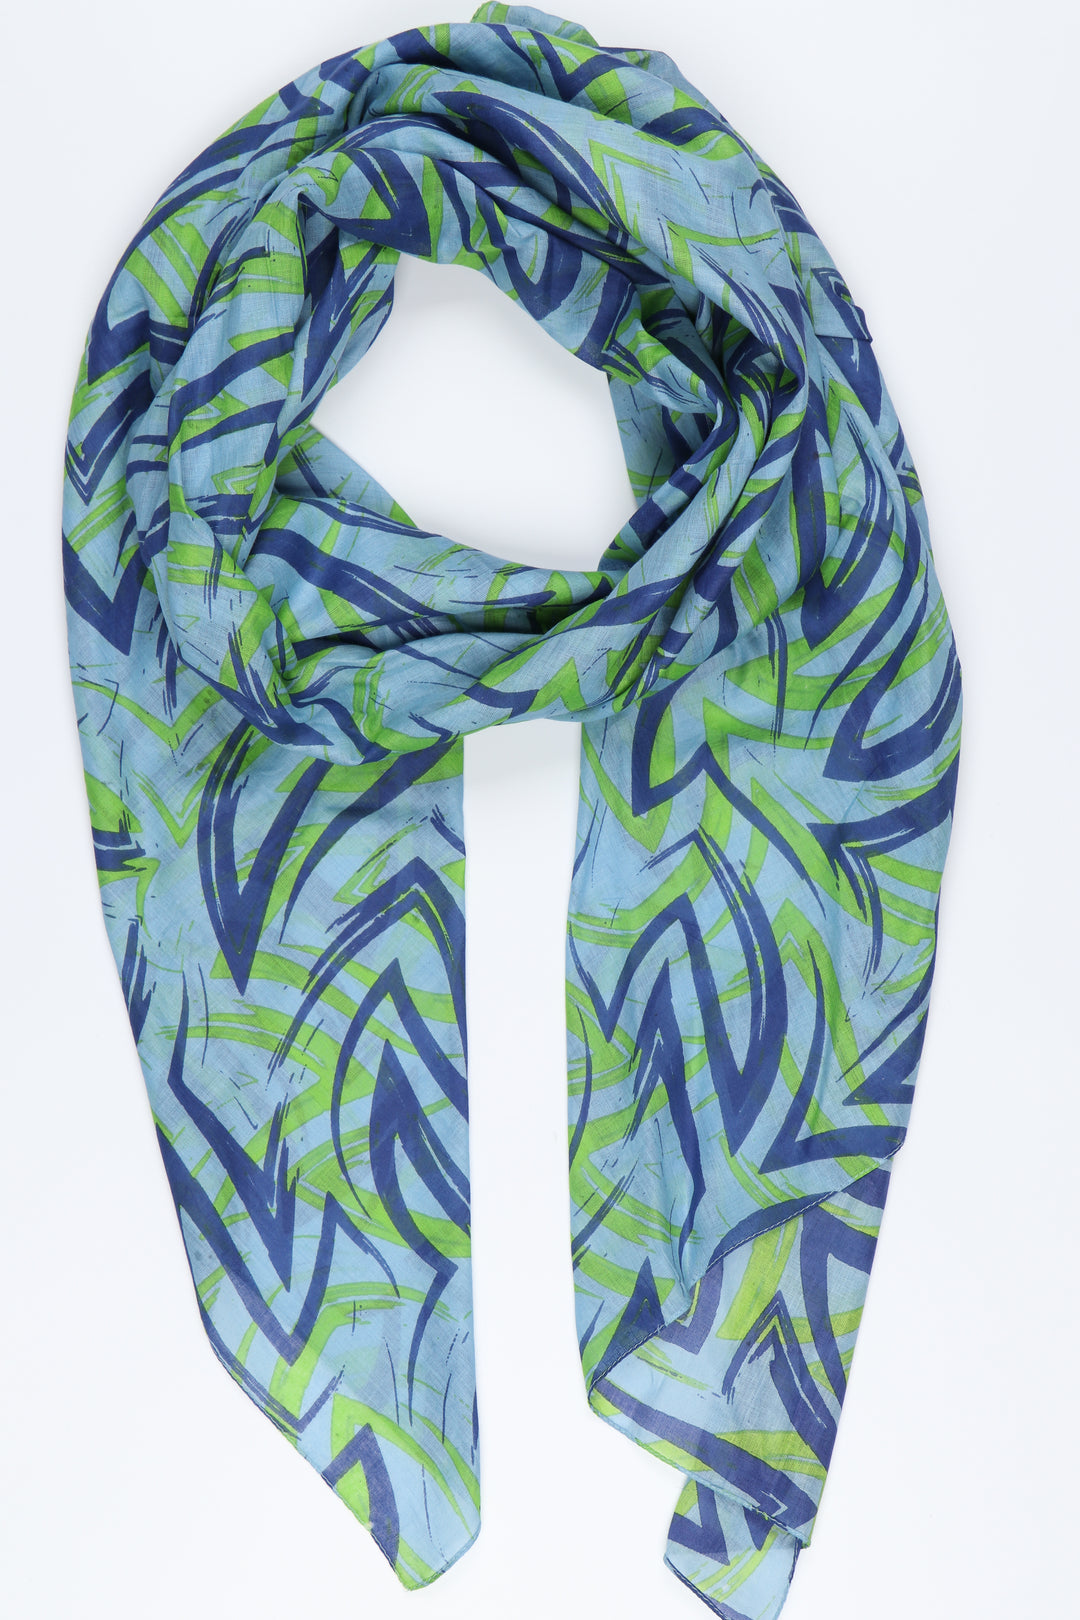 blue cotton scarf with an all over pattern of artistic brushstrokes in blue and green